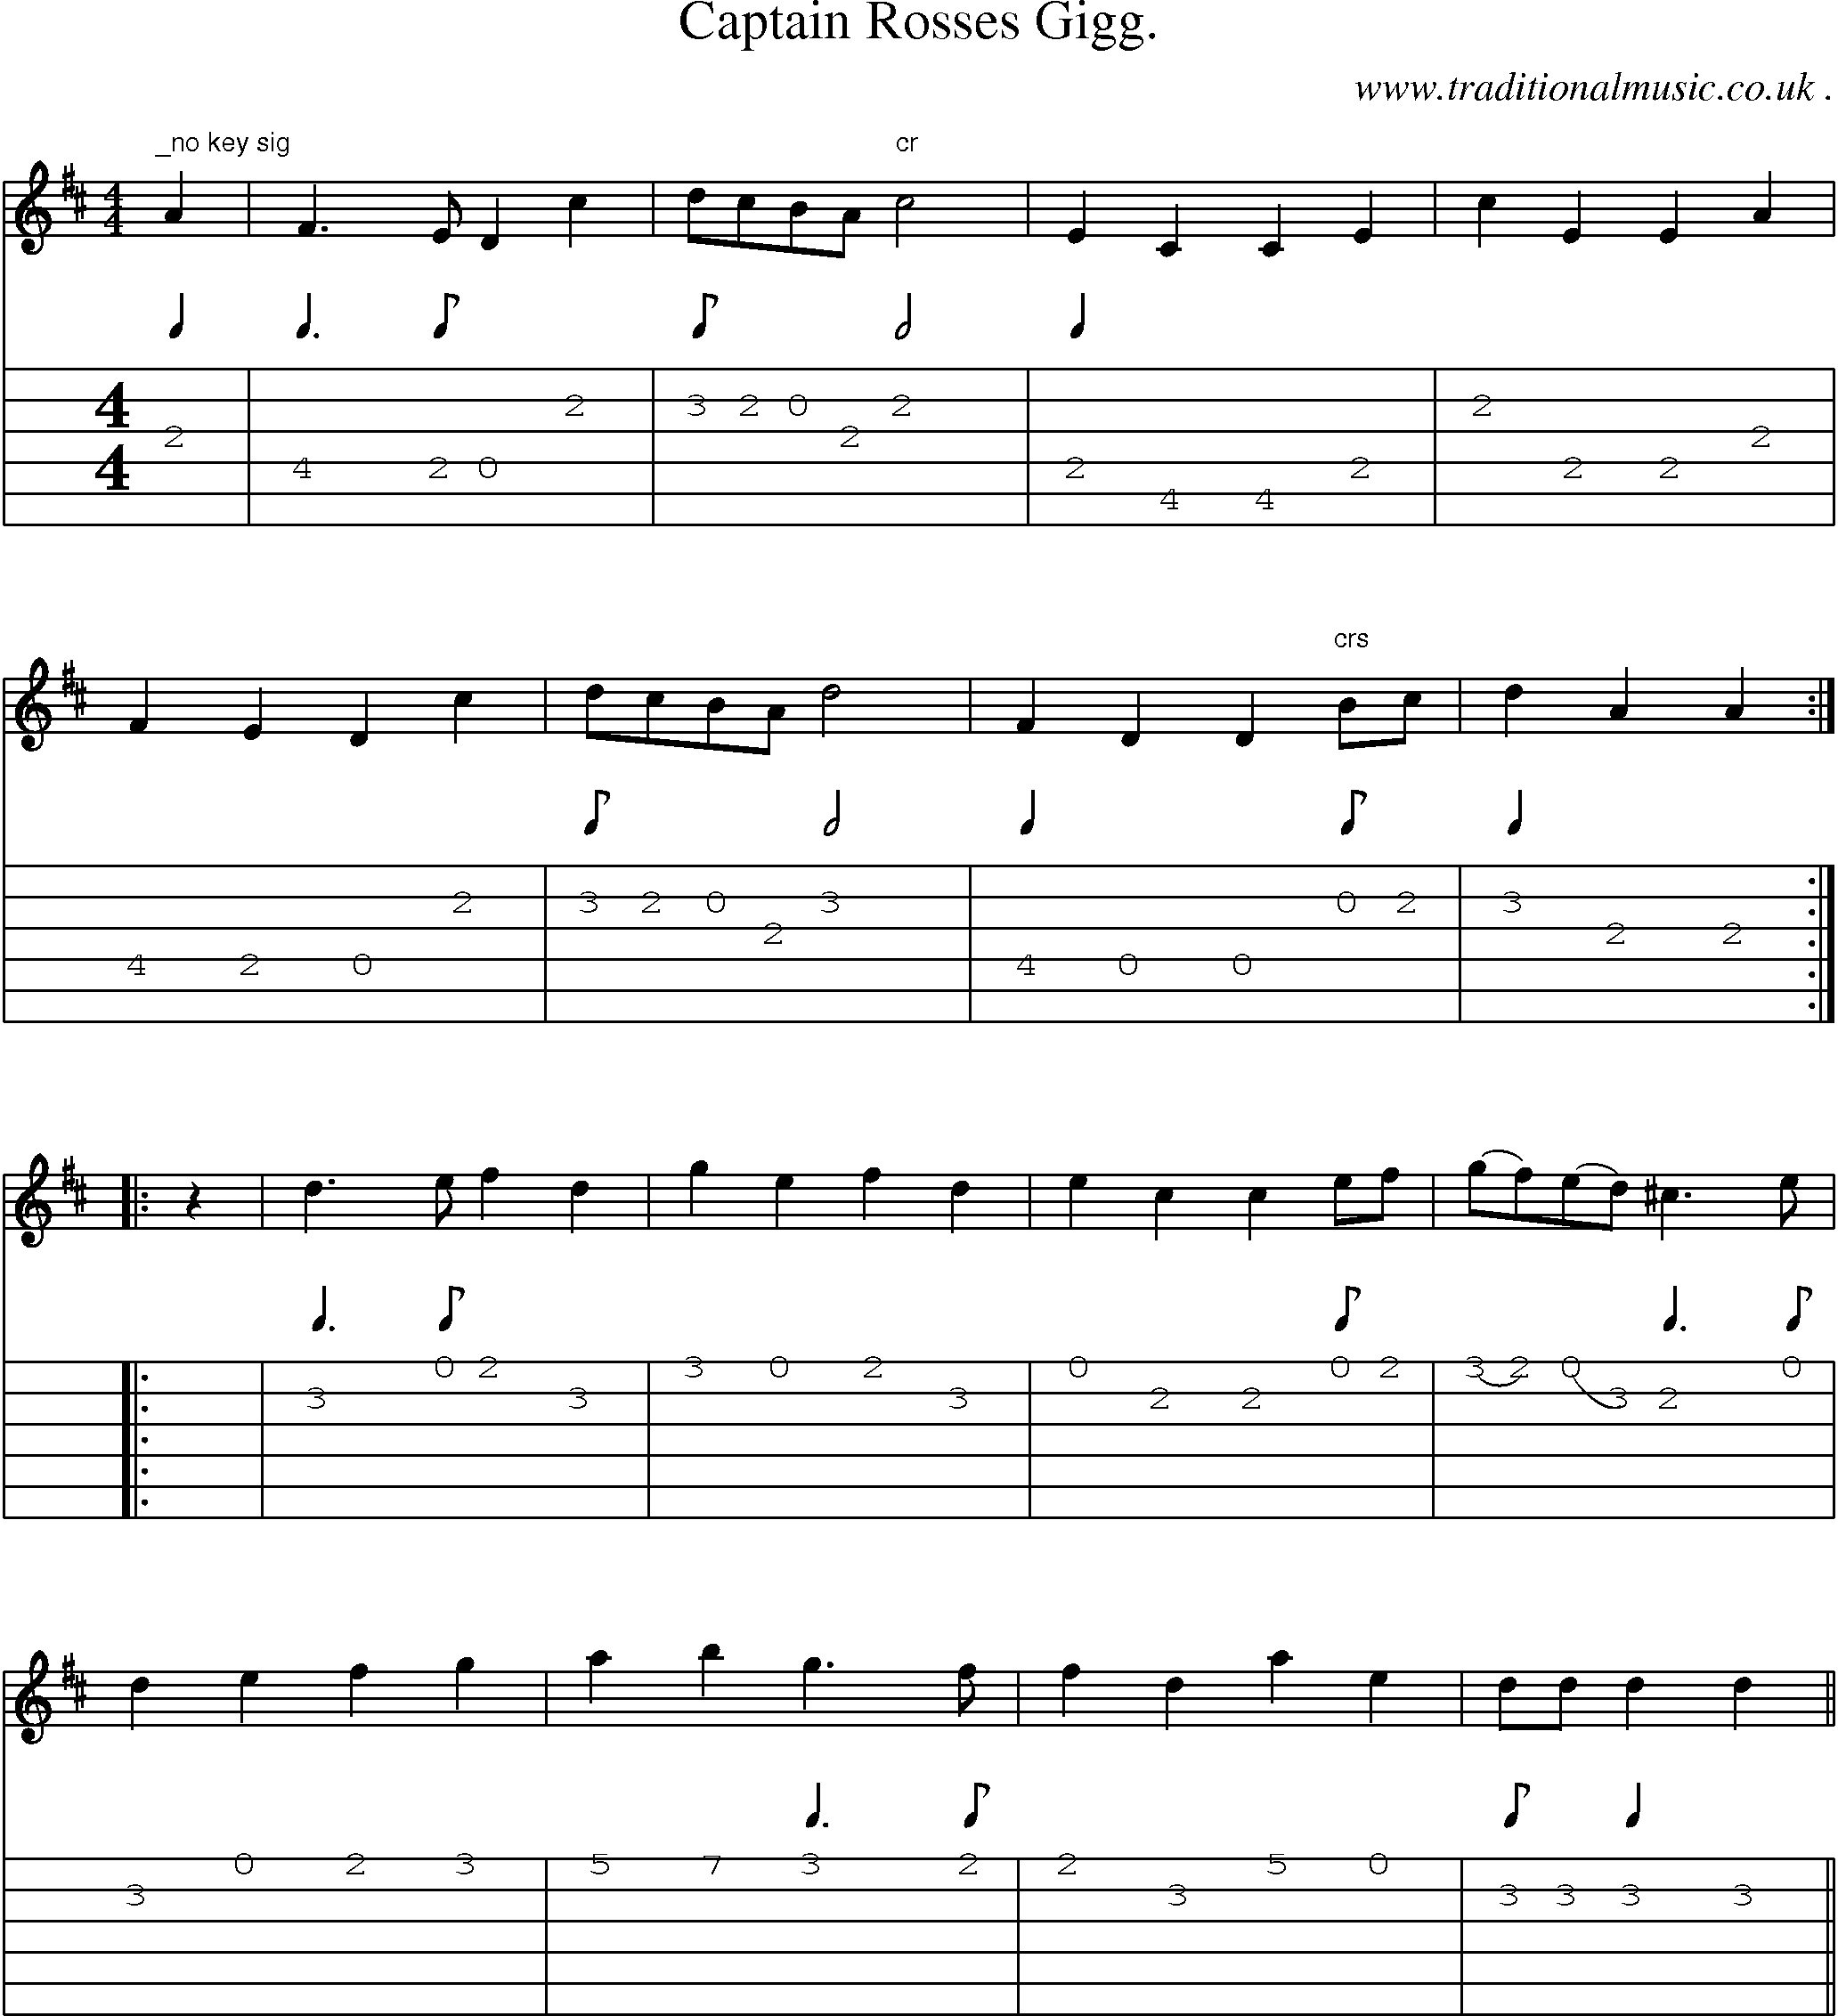 Sheet-Music and Guitar Tabs for Captain Rosses Gigg